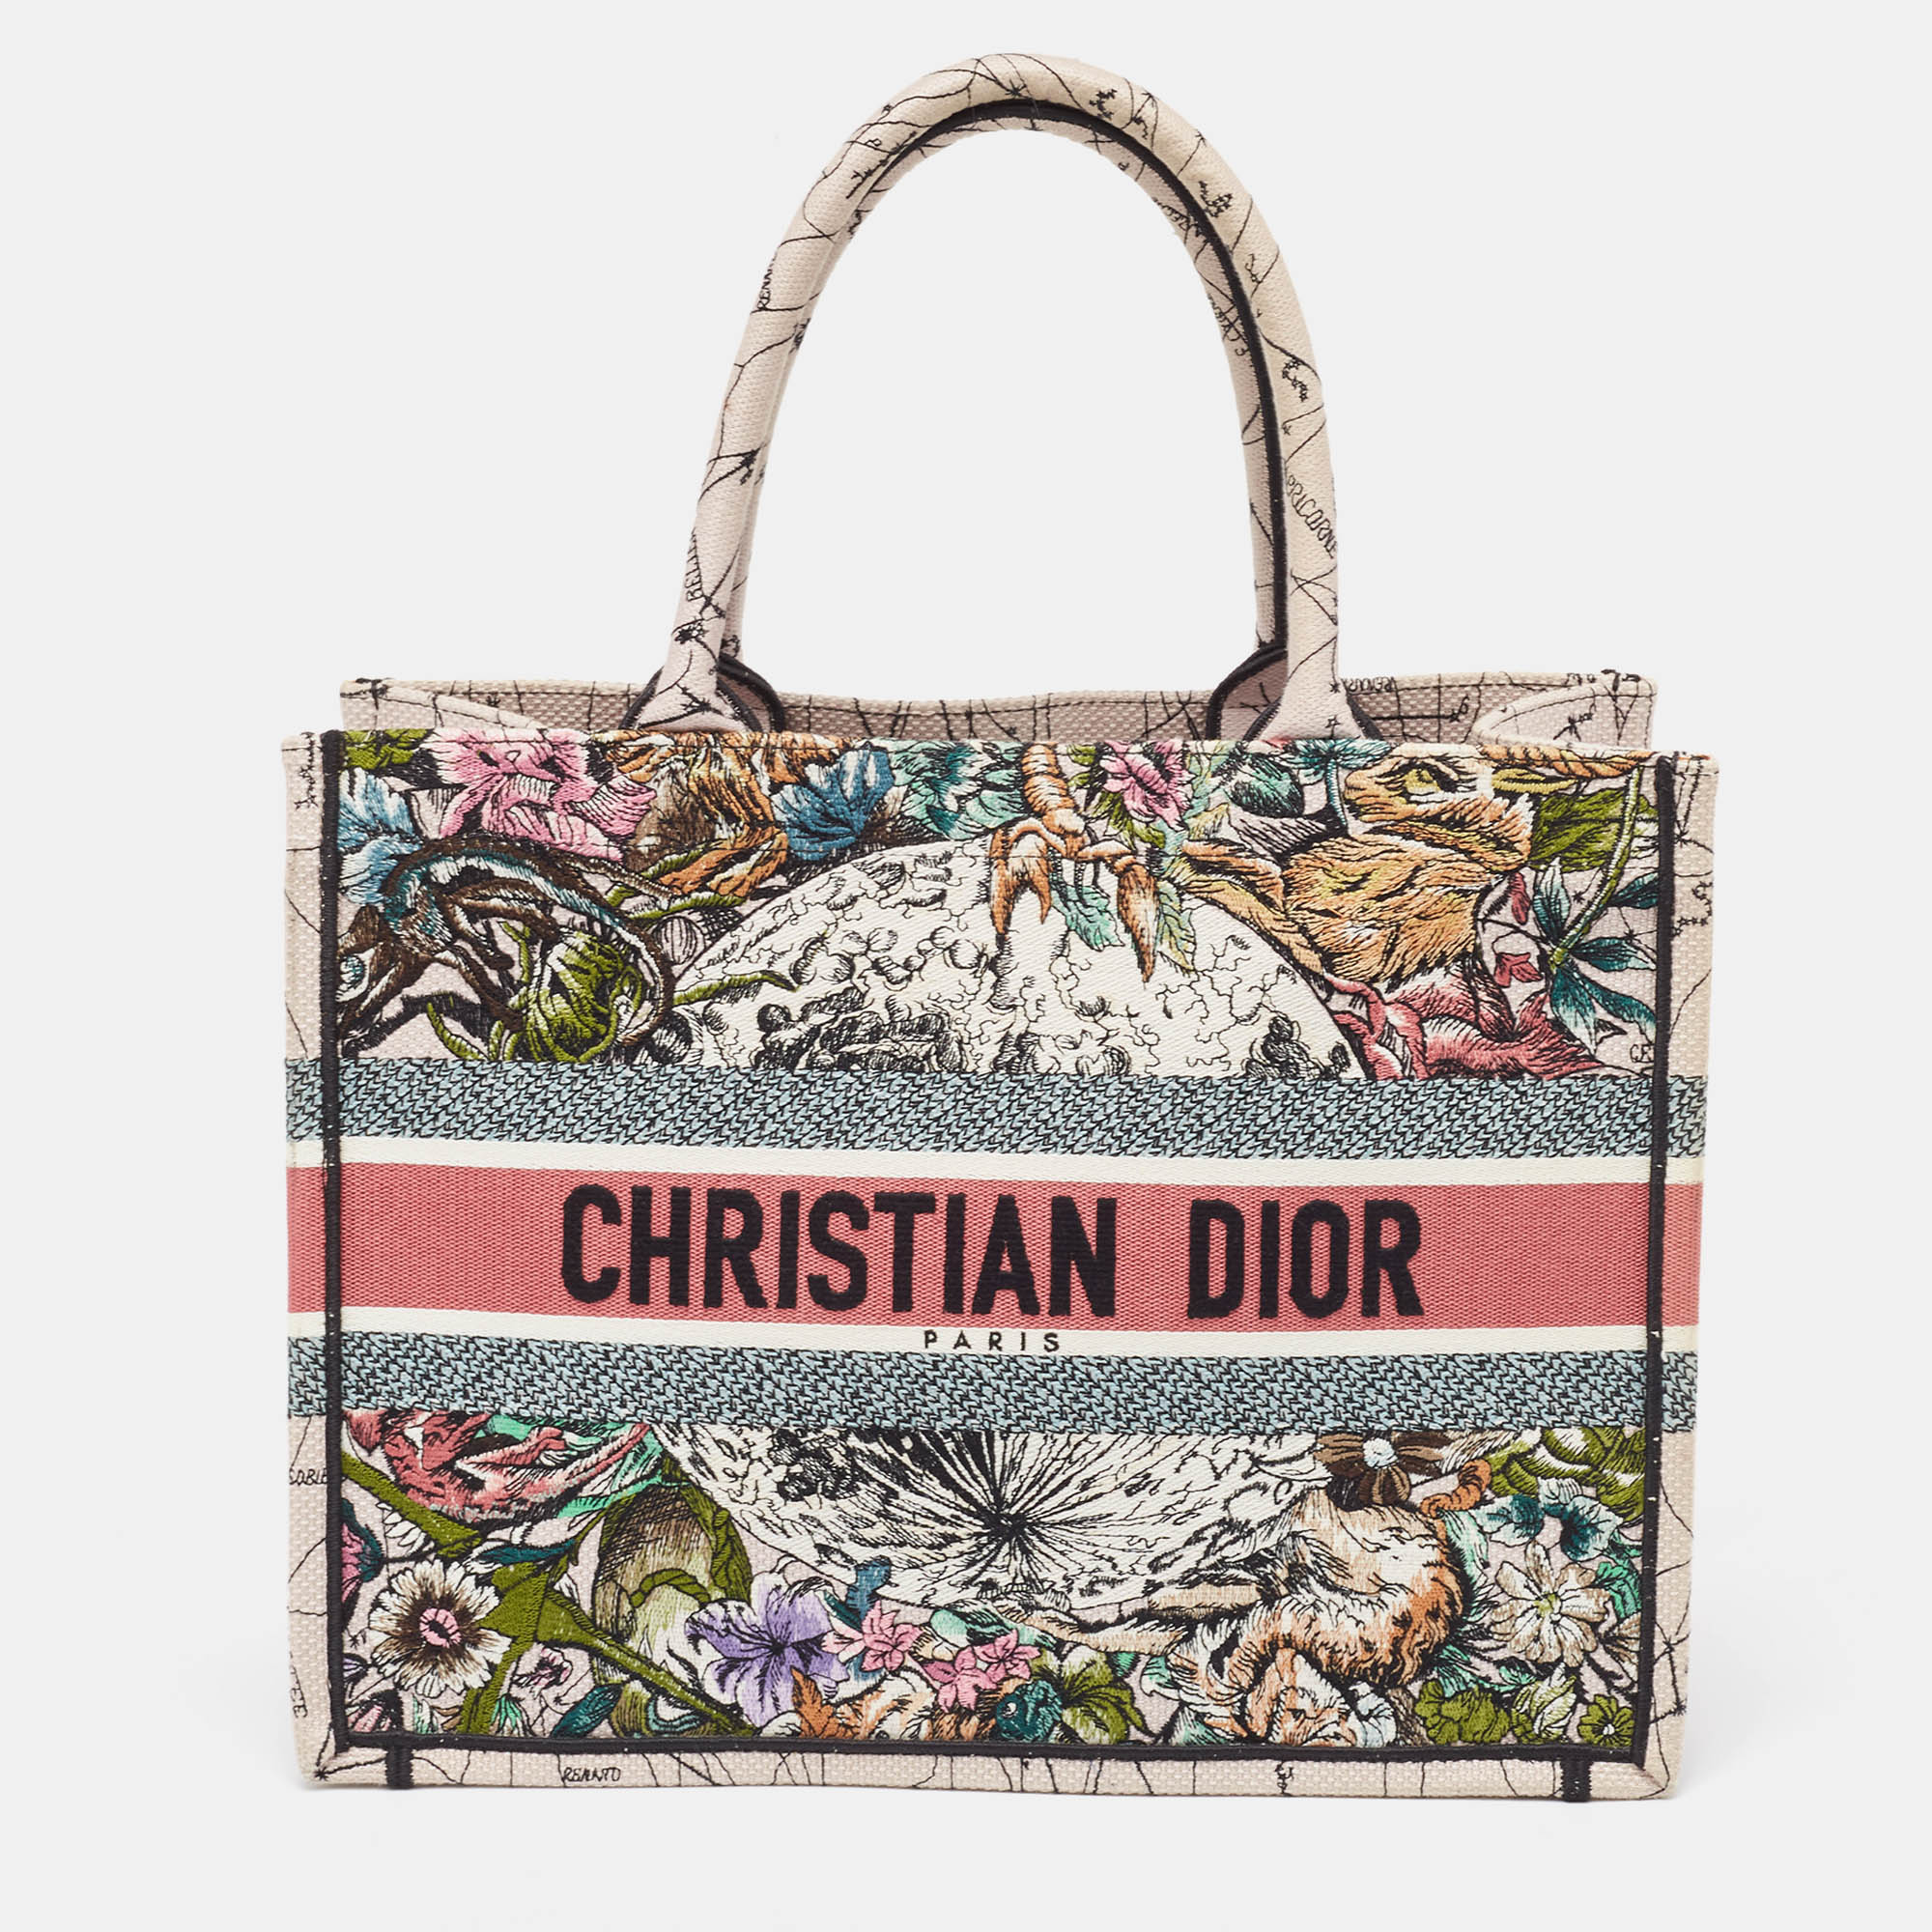 The Book Tote features a canvas body rolled handles and a lined interior. Elevate your every day with this Dior tote. Meticulously designed it seamlessly blends functionality with luxury offering the perfect accessory to showcase your discerning style while effortlessly carrying your essentials.